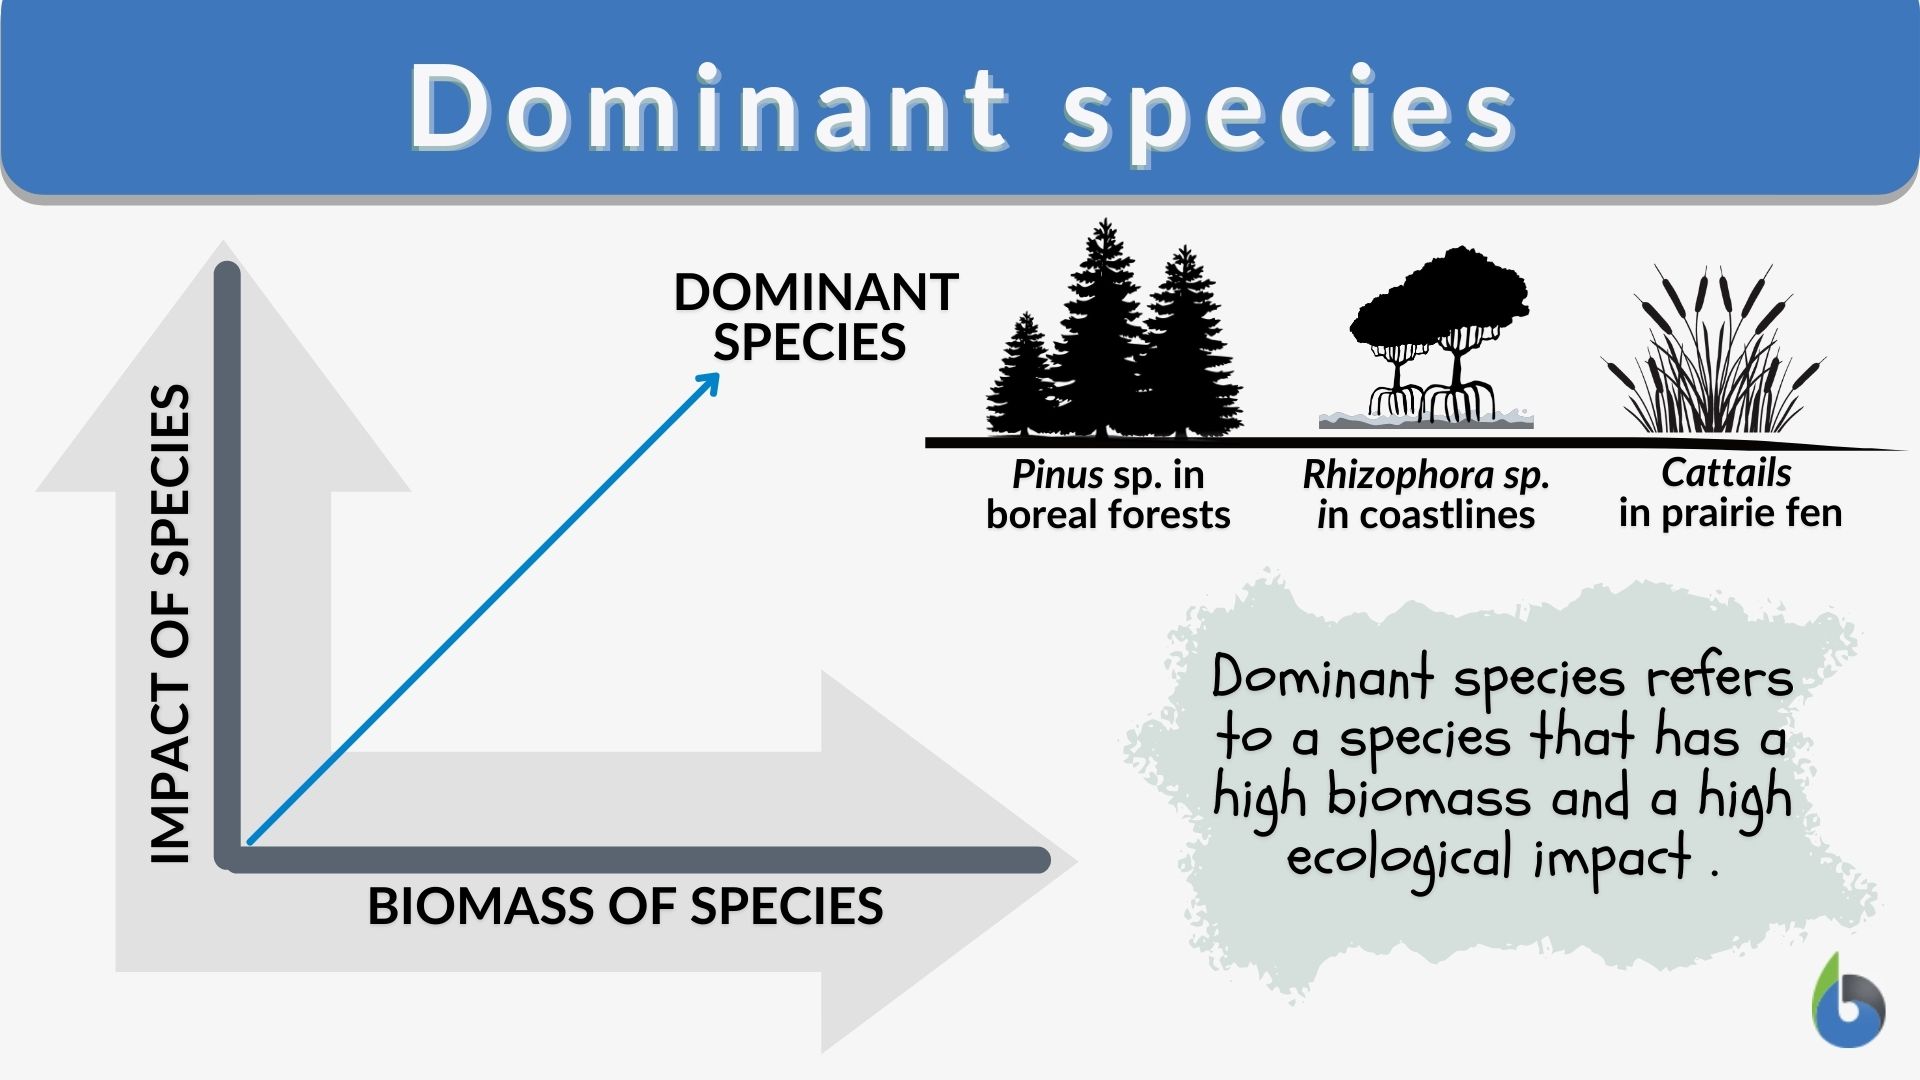 Keystone Species: Definition, types and significance 